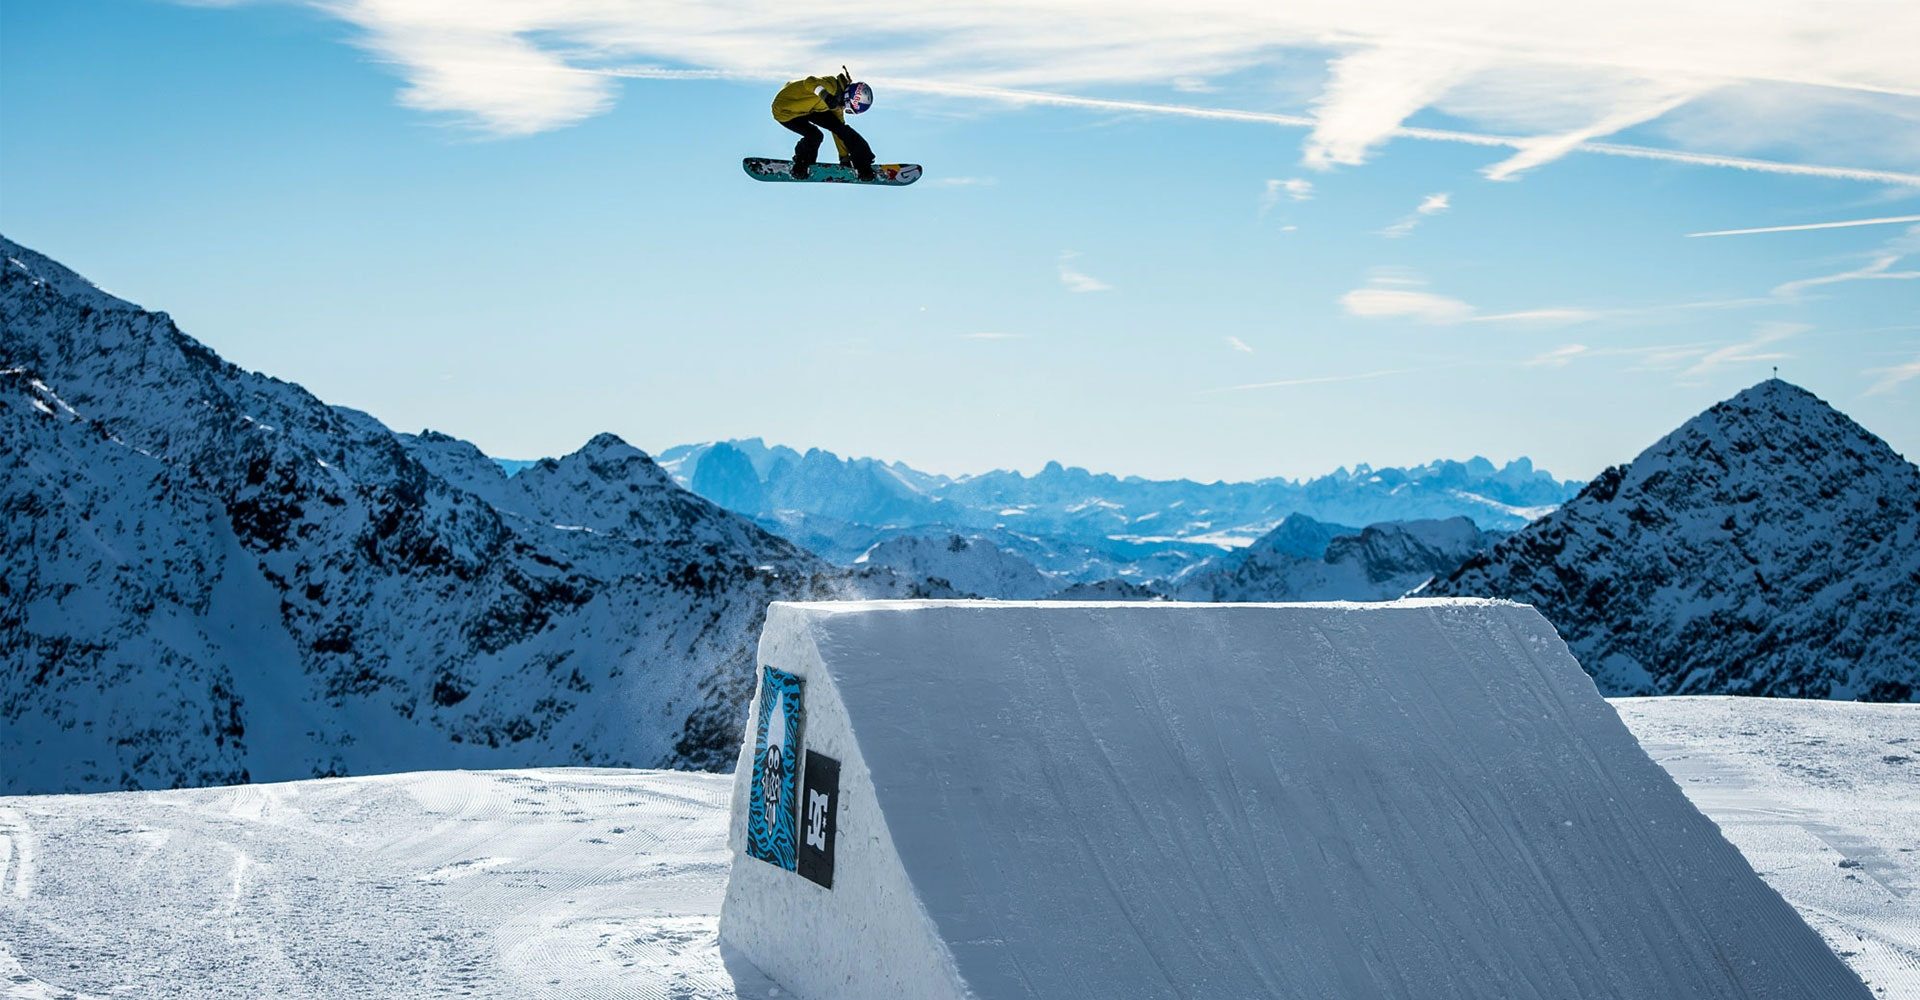 Anna-Gasser-Prime-Park-Sessions-Big-Air-Olympic-Snowboarding-Preview